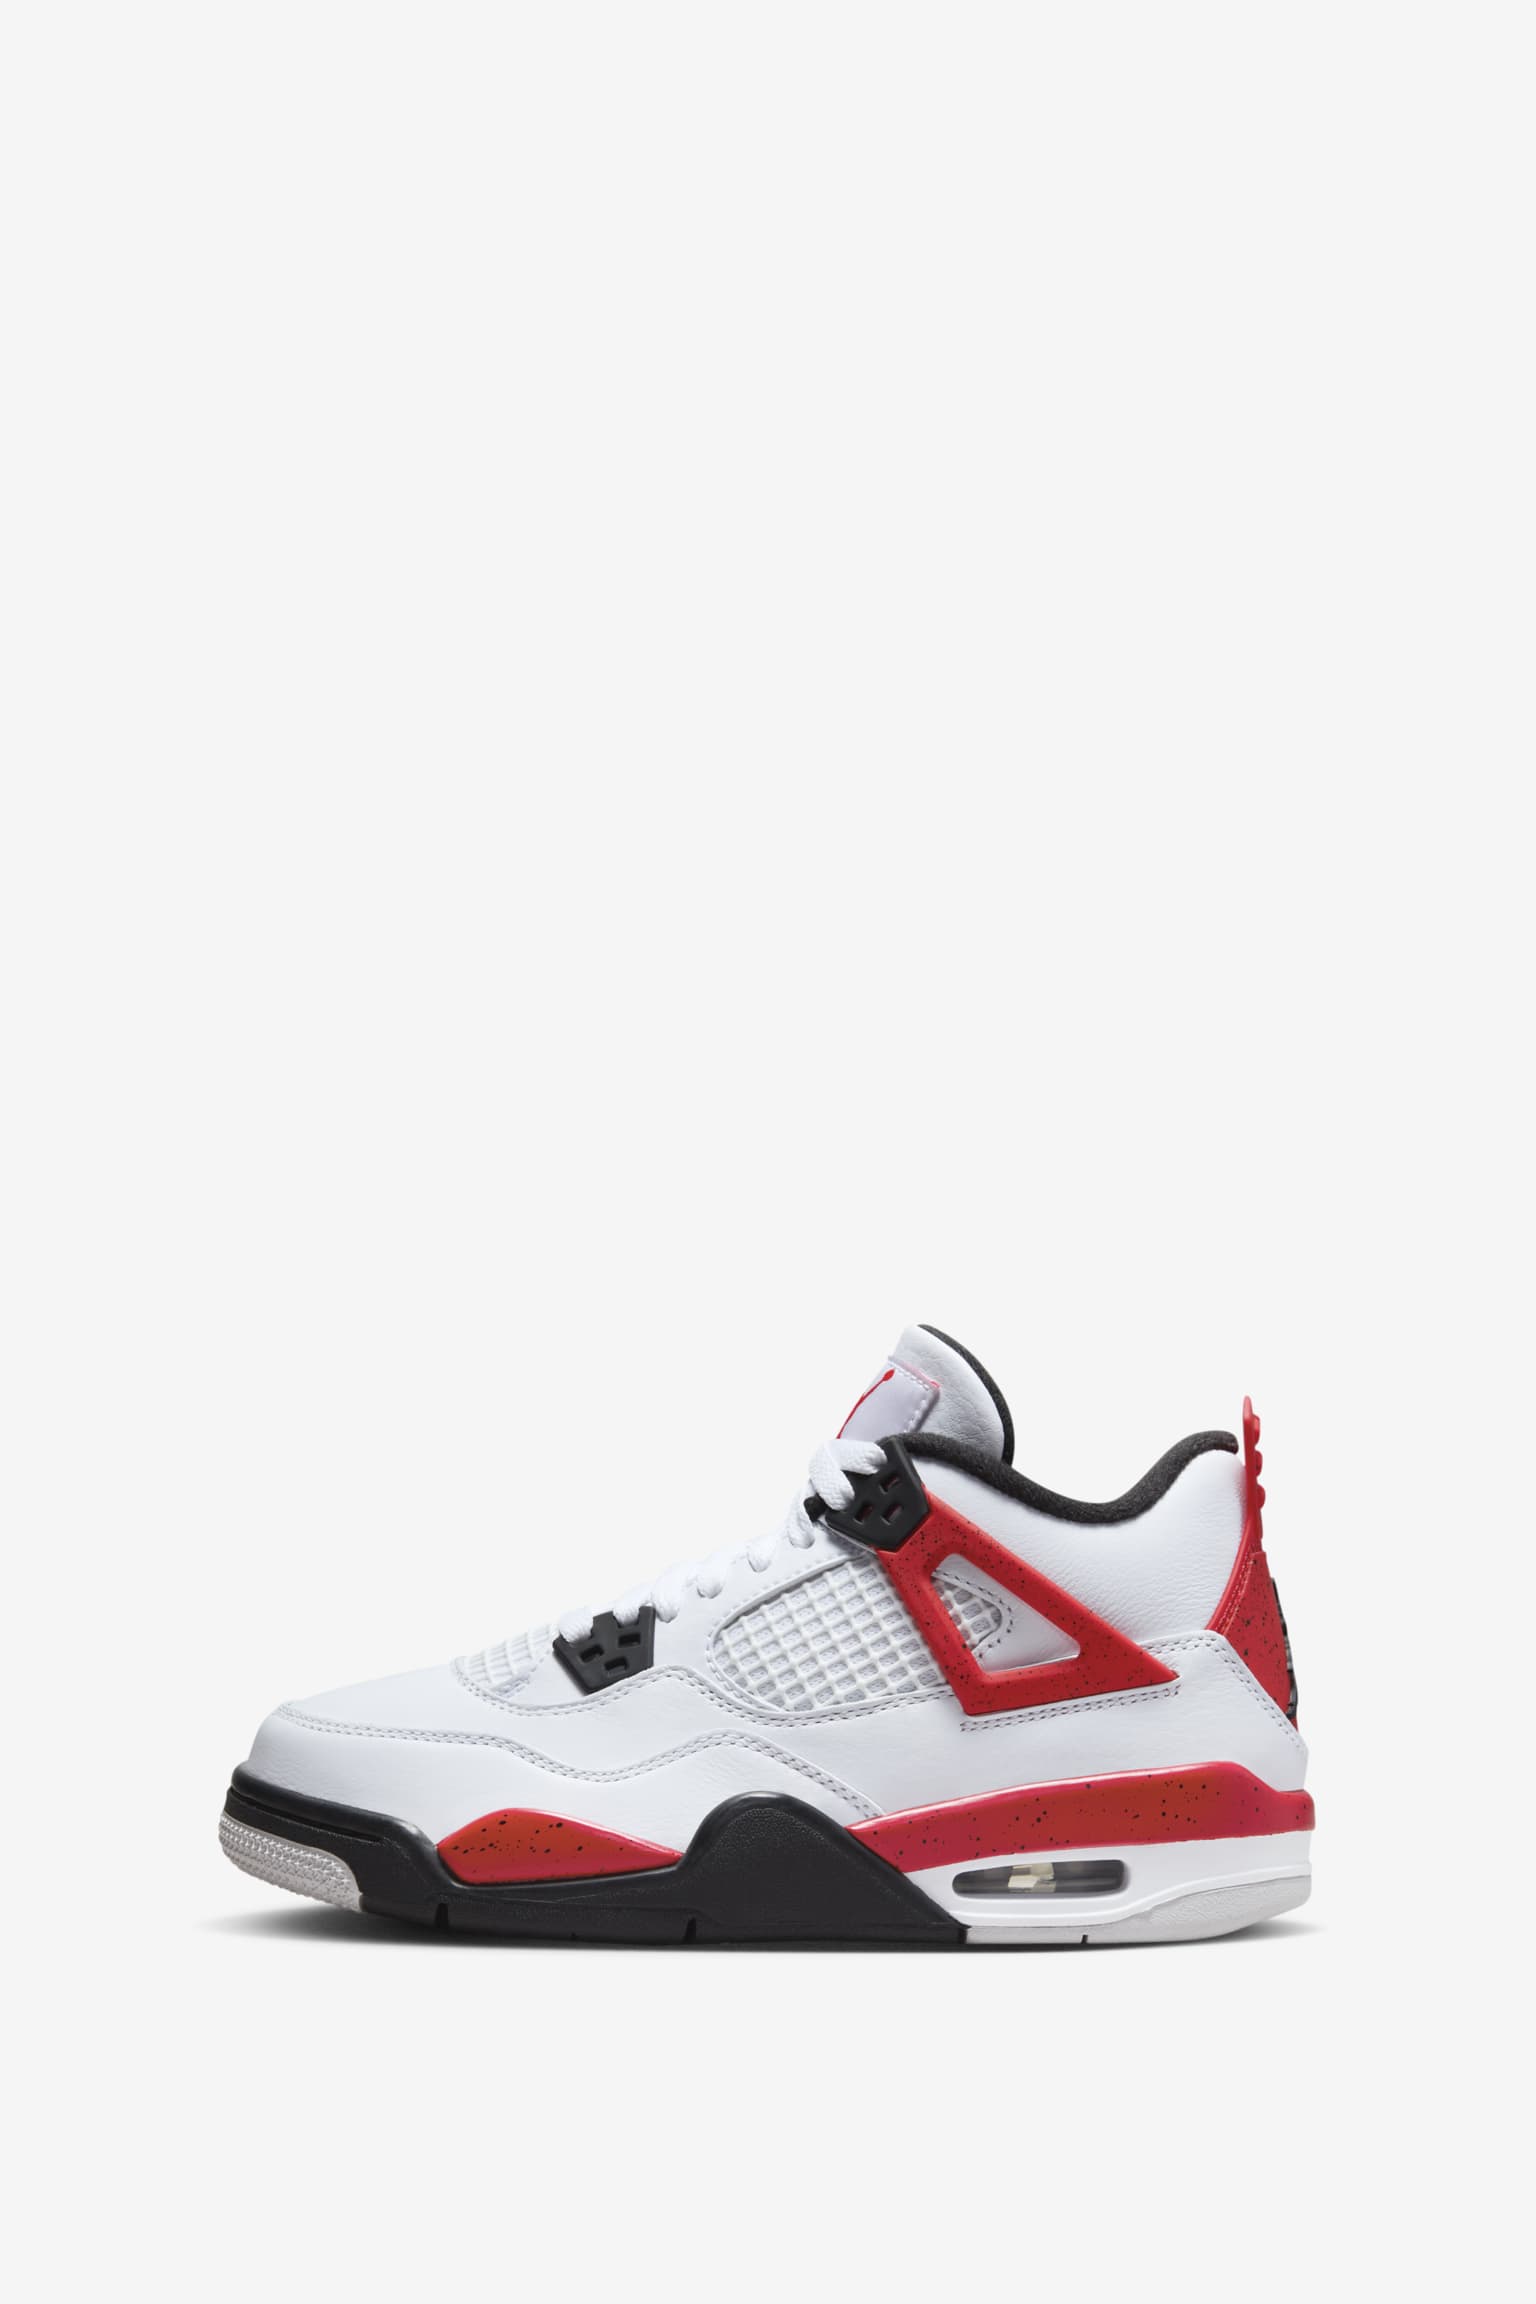 Air Jordan 4 'Red Cement' (DH6927-161) release date . Nike SNKRS MY